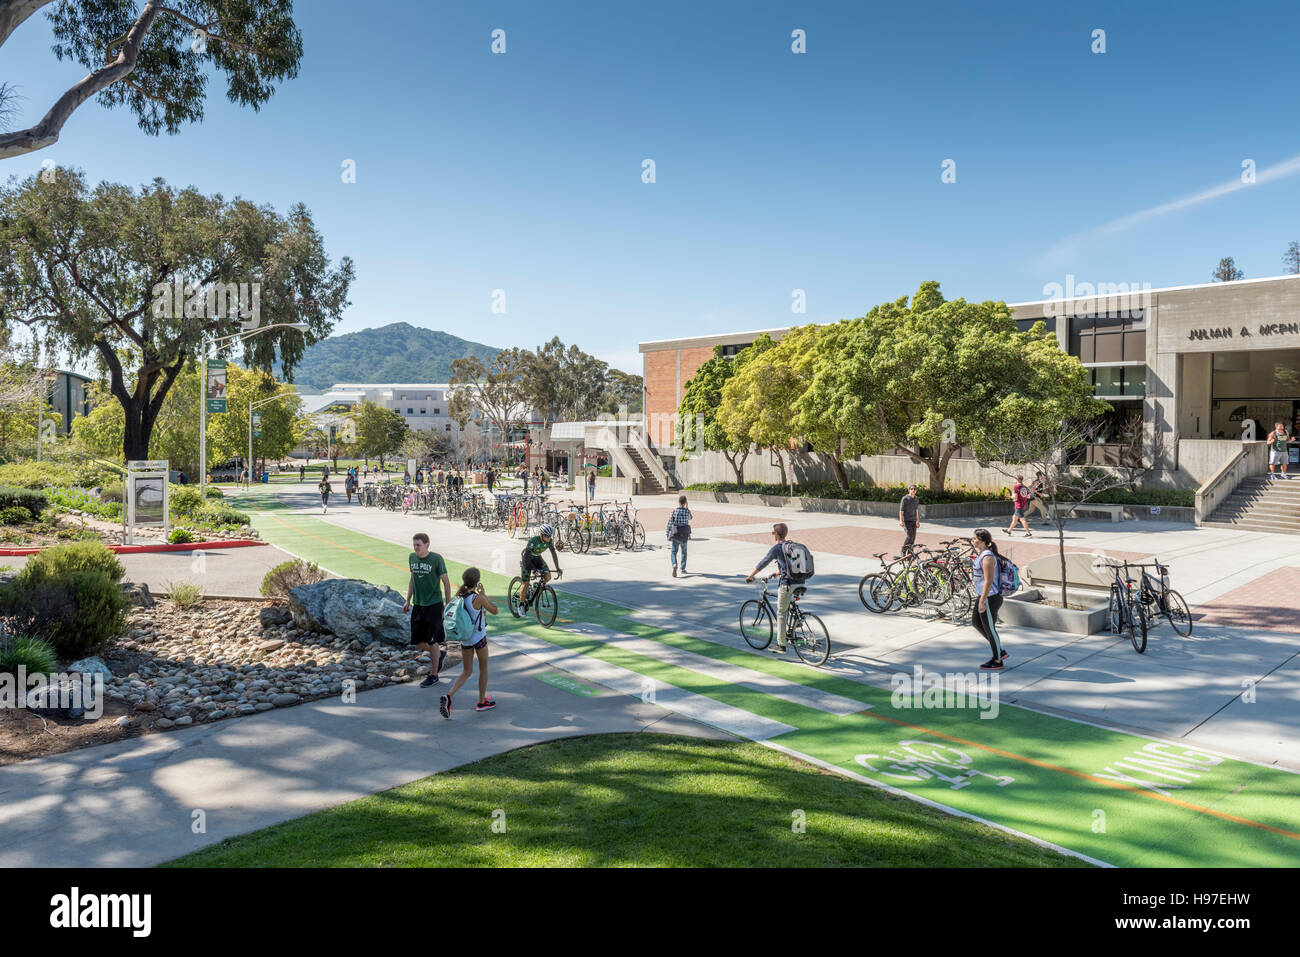 Campus, student union building and students at California Polytechnic State University, (Cal Poly) at San Luis Obispo, CA, USA. Stock Photo